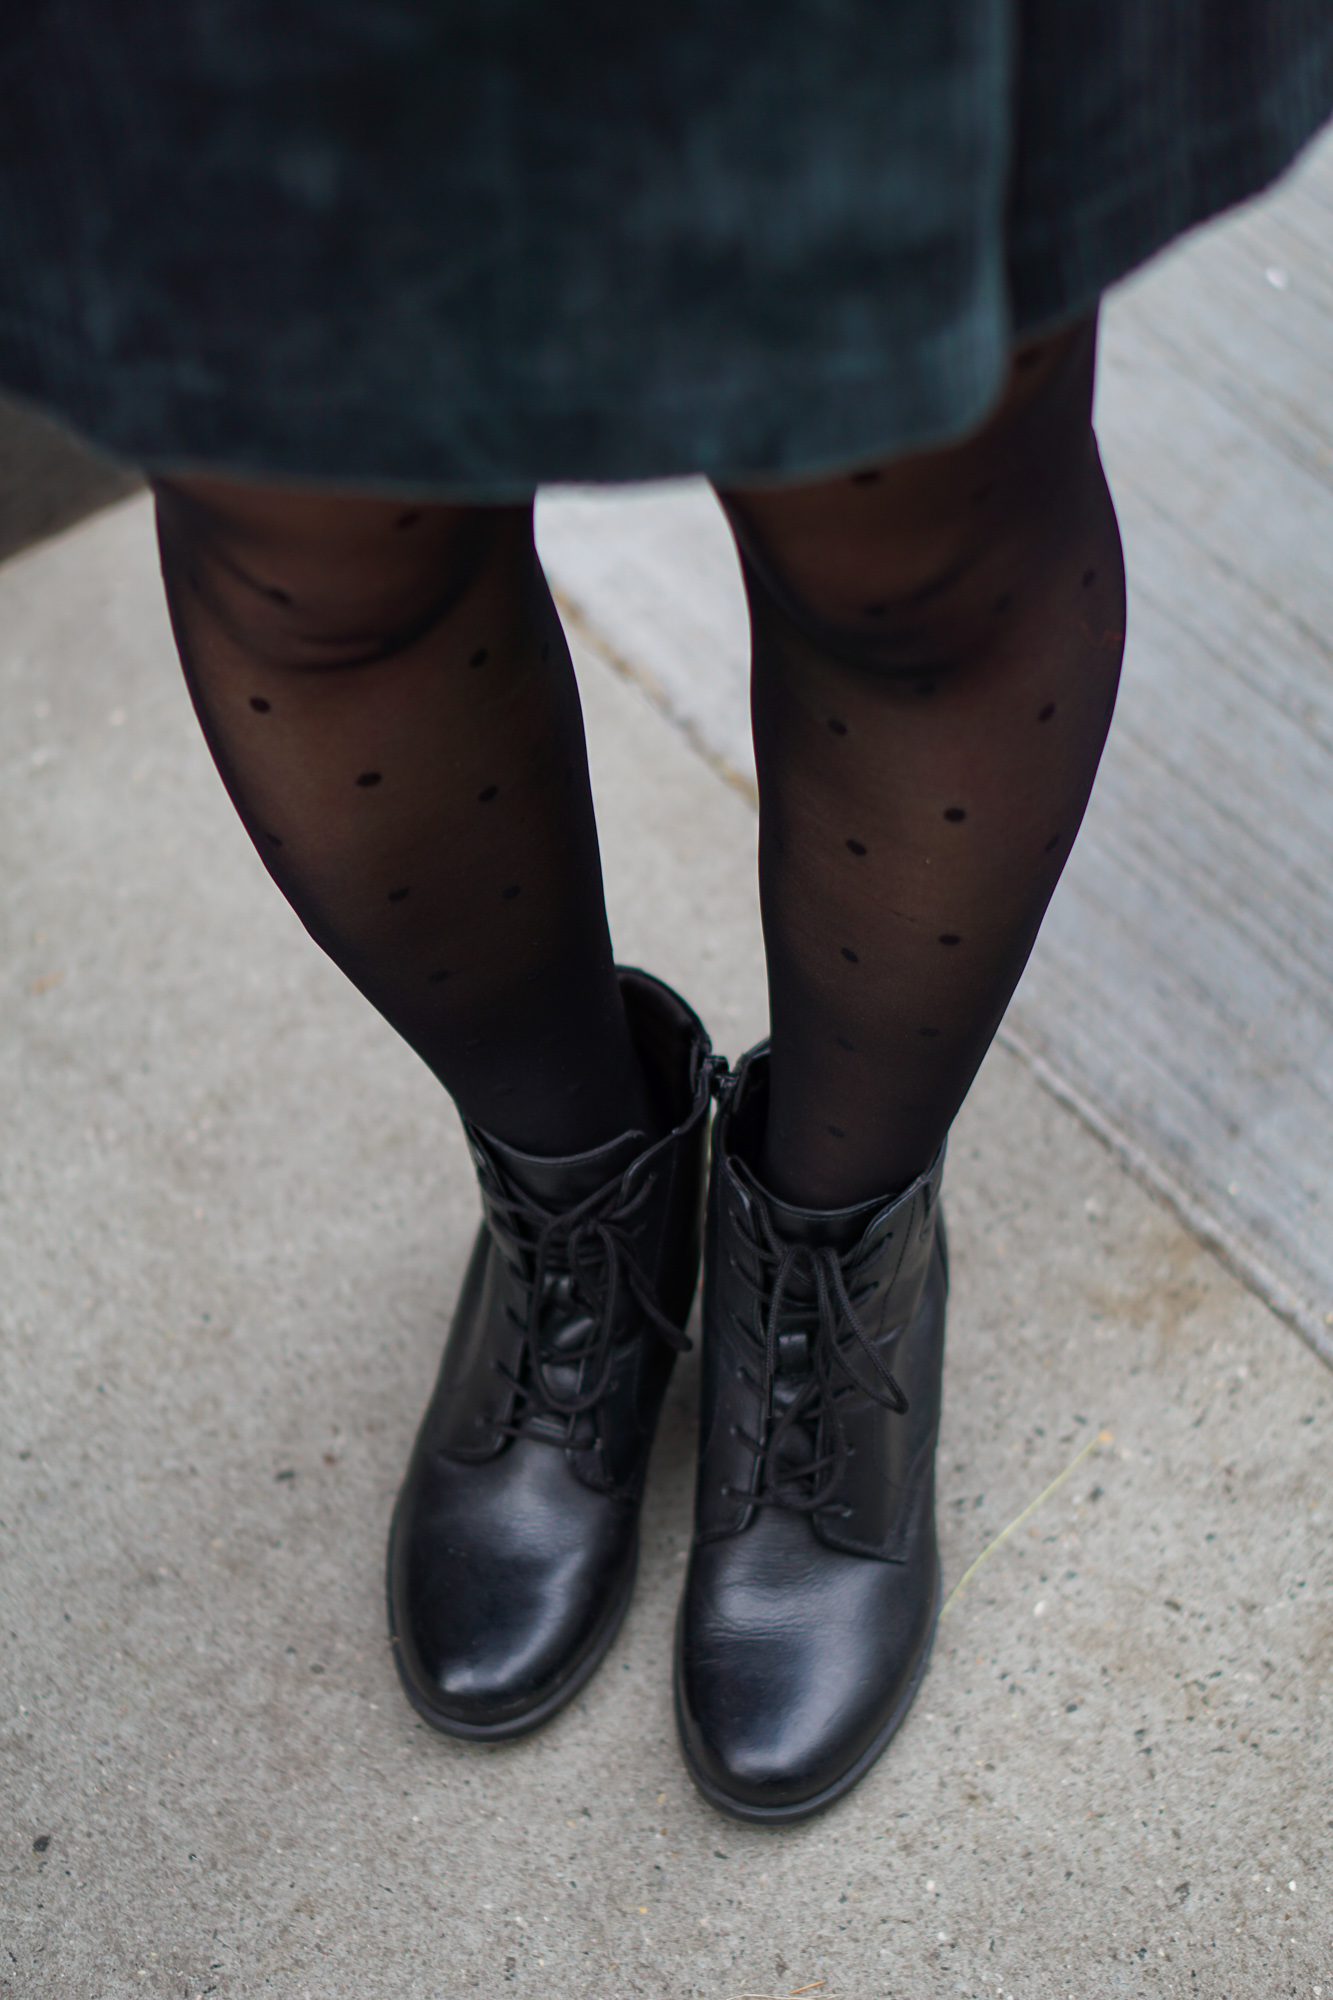 Tights and booties